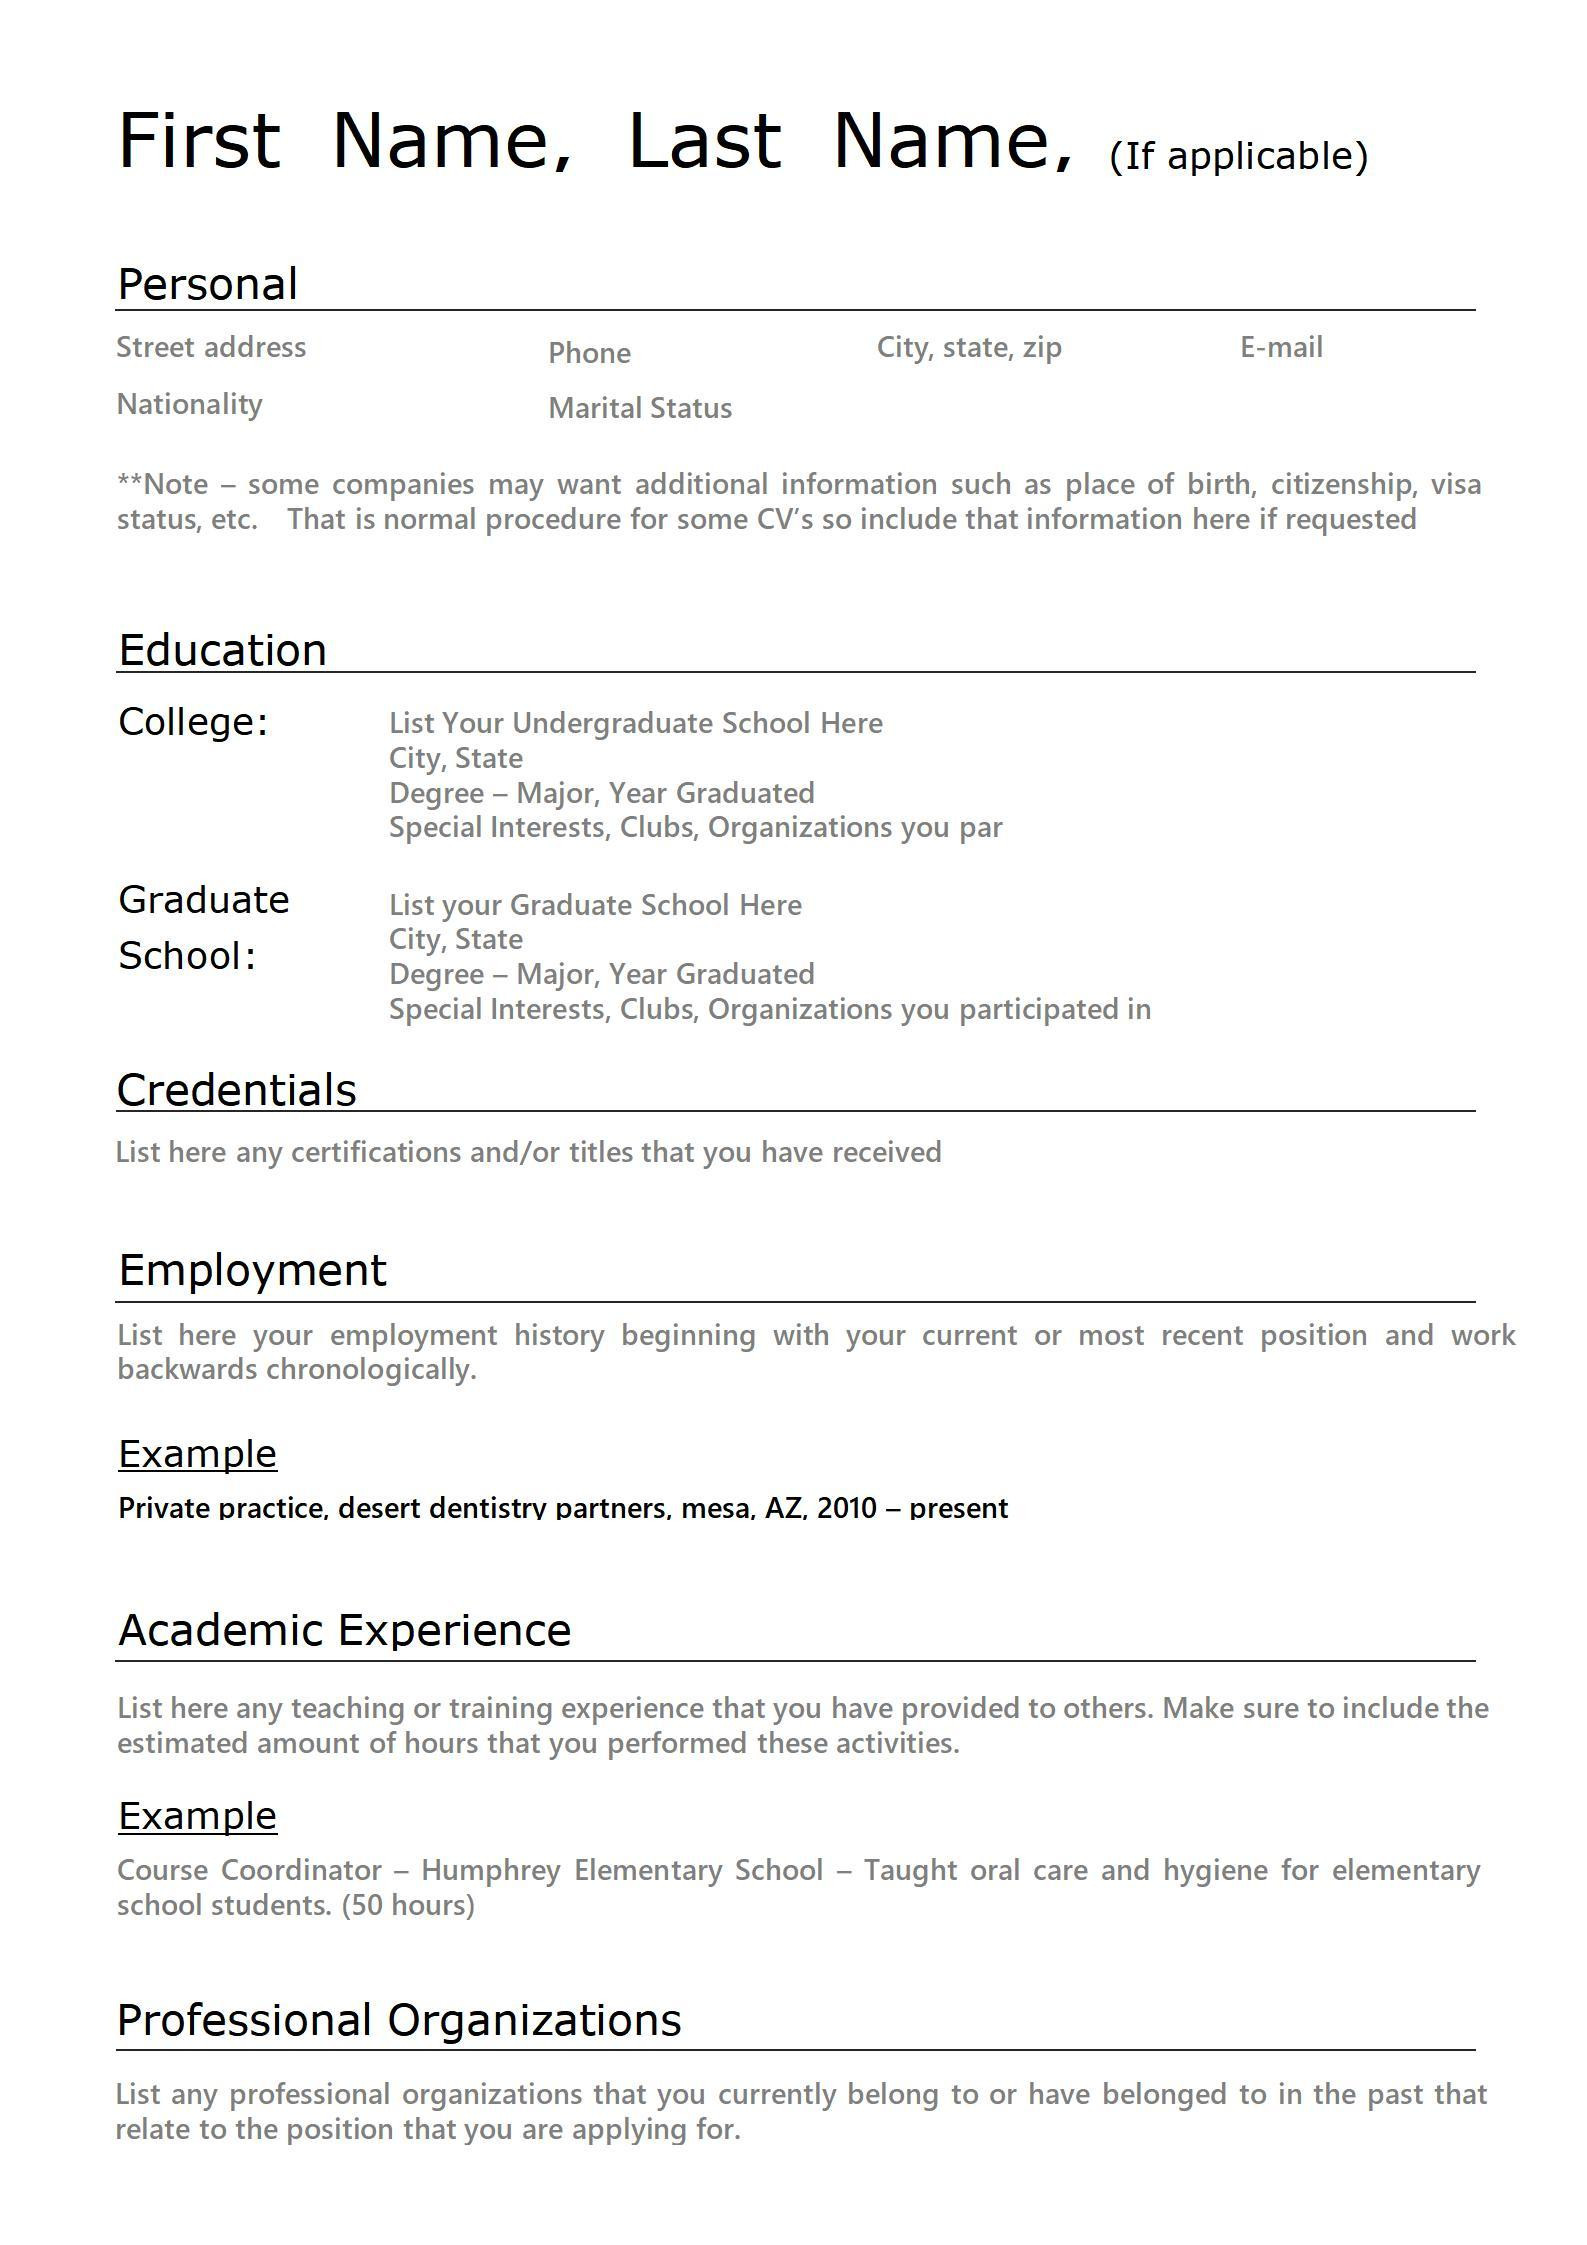 Resume Samples Templates First Job Student First-time Resume with No Experience Samples Wps Office Academy